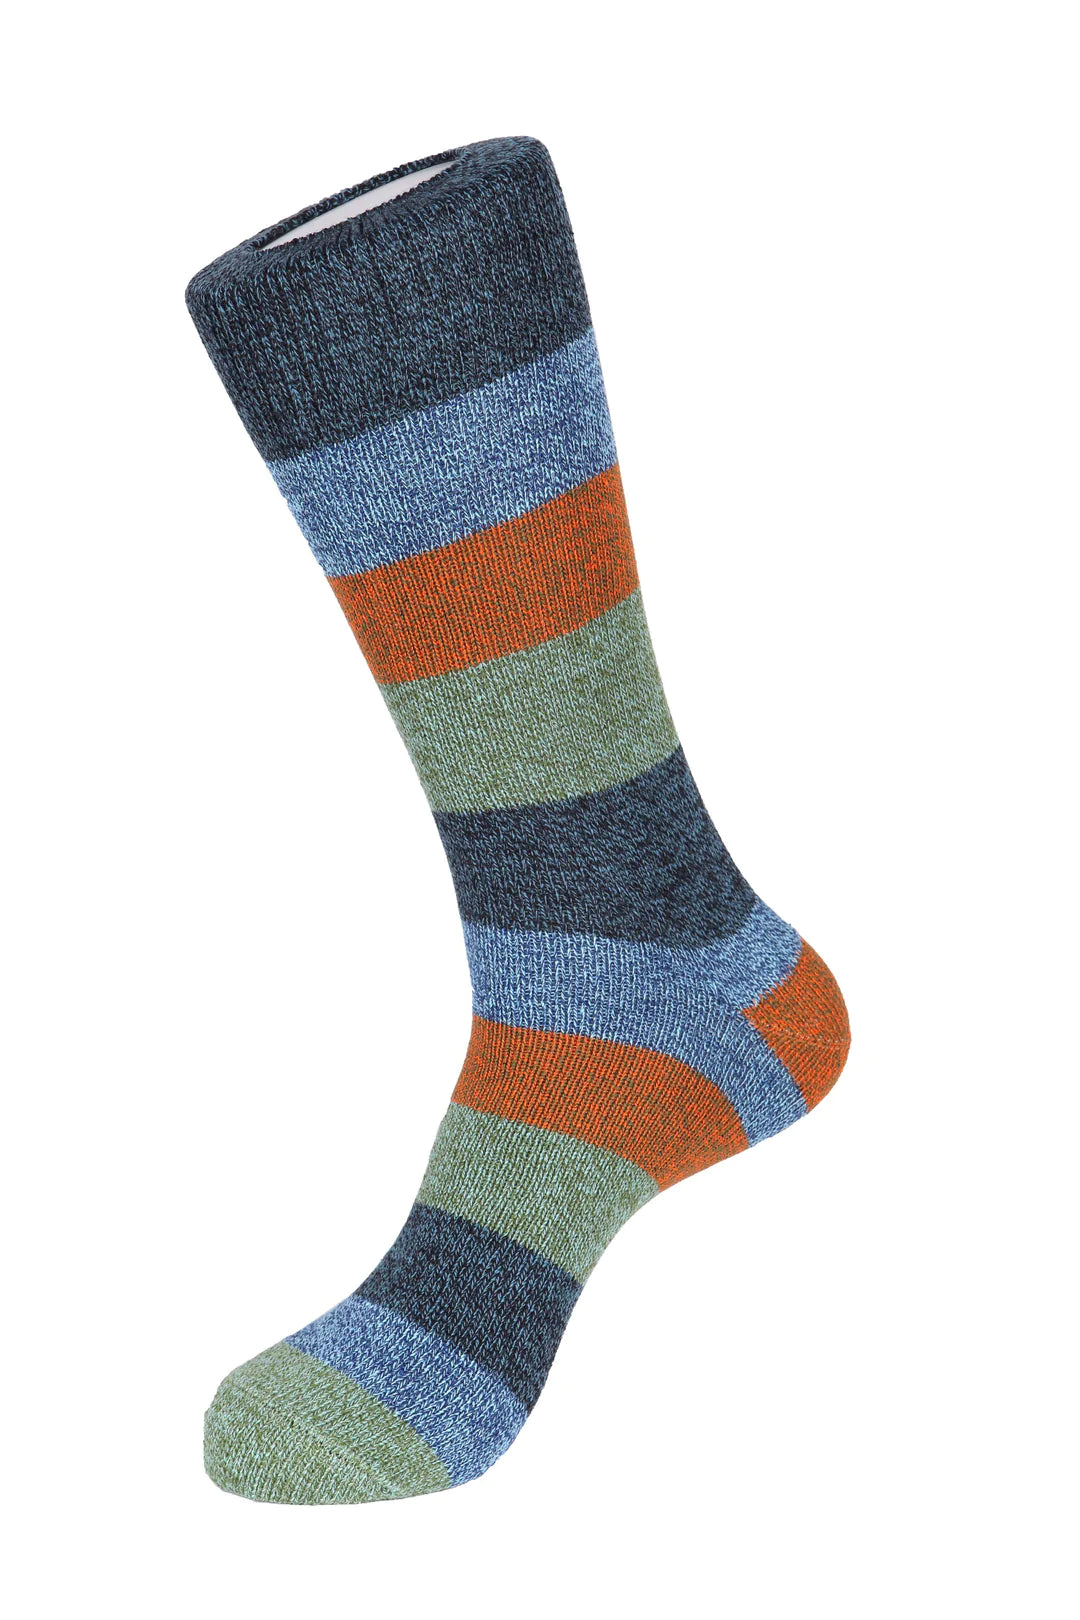 Unsimply Stitched socks with green, orange, blue and grey stripes, making it a great pairing with DFR89 blue denim jeans and a fun Sugar sport shirt.